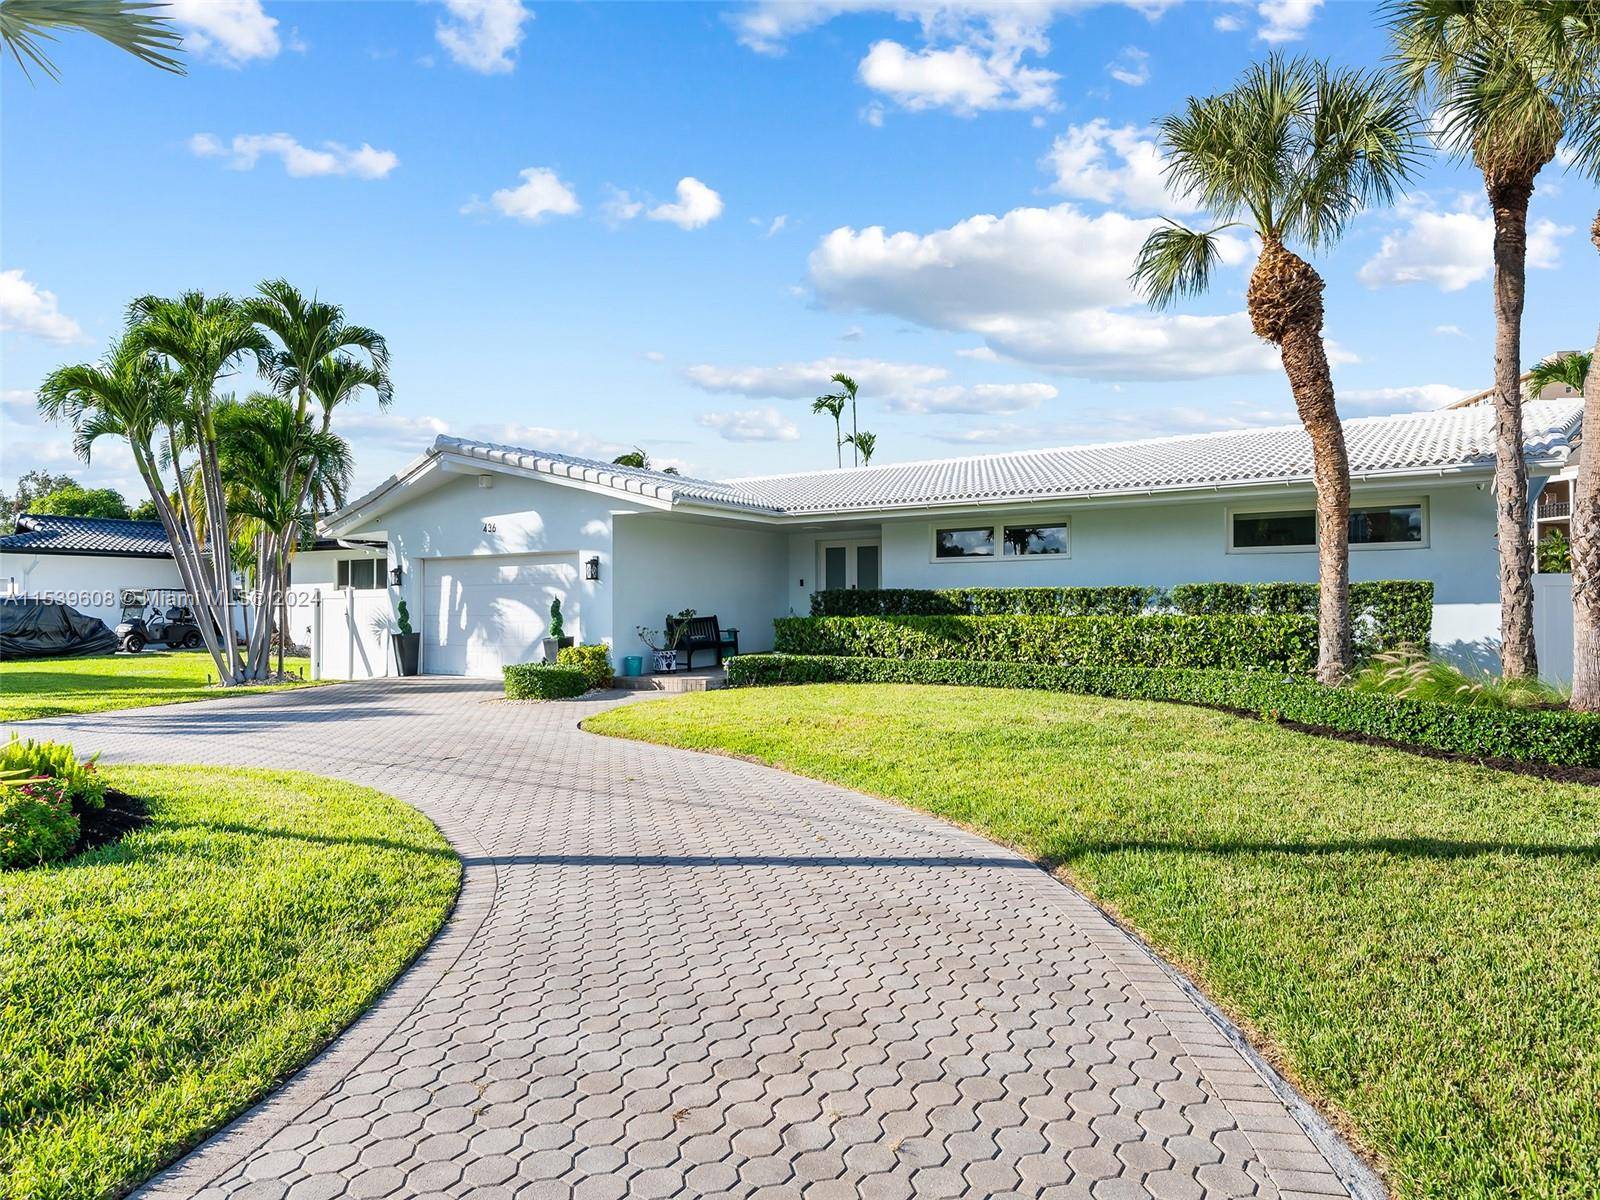 Nestled within the prestigious gated community of Golden Isles Estates, this 3 bedroom 2 bath 2 car garage waterfront home promises a taste of the luxurious Florida lifestyle.